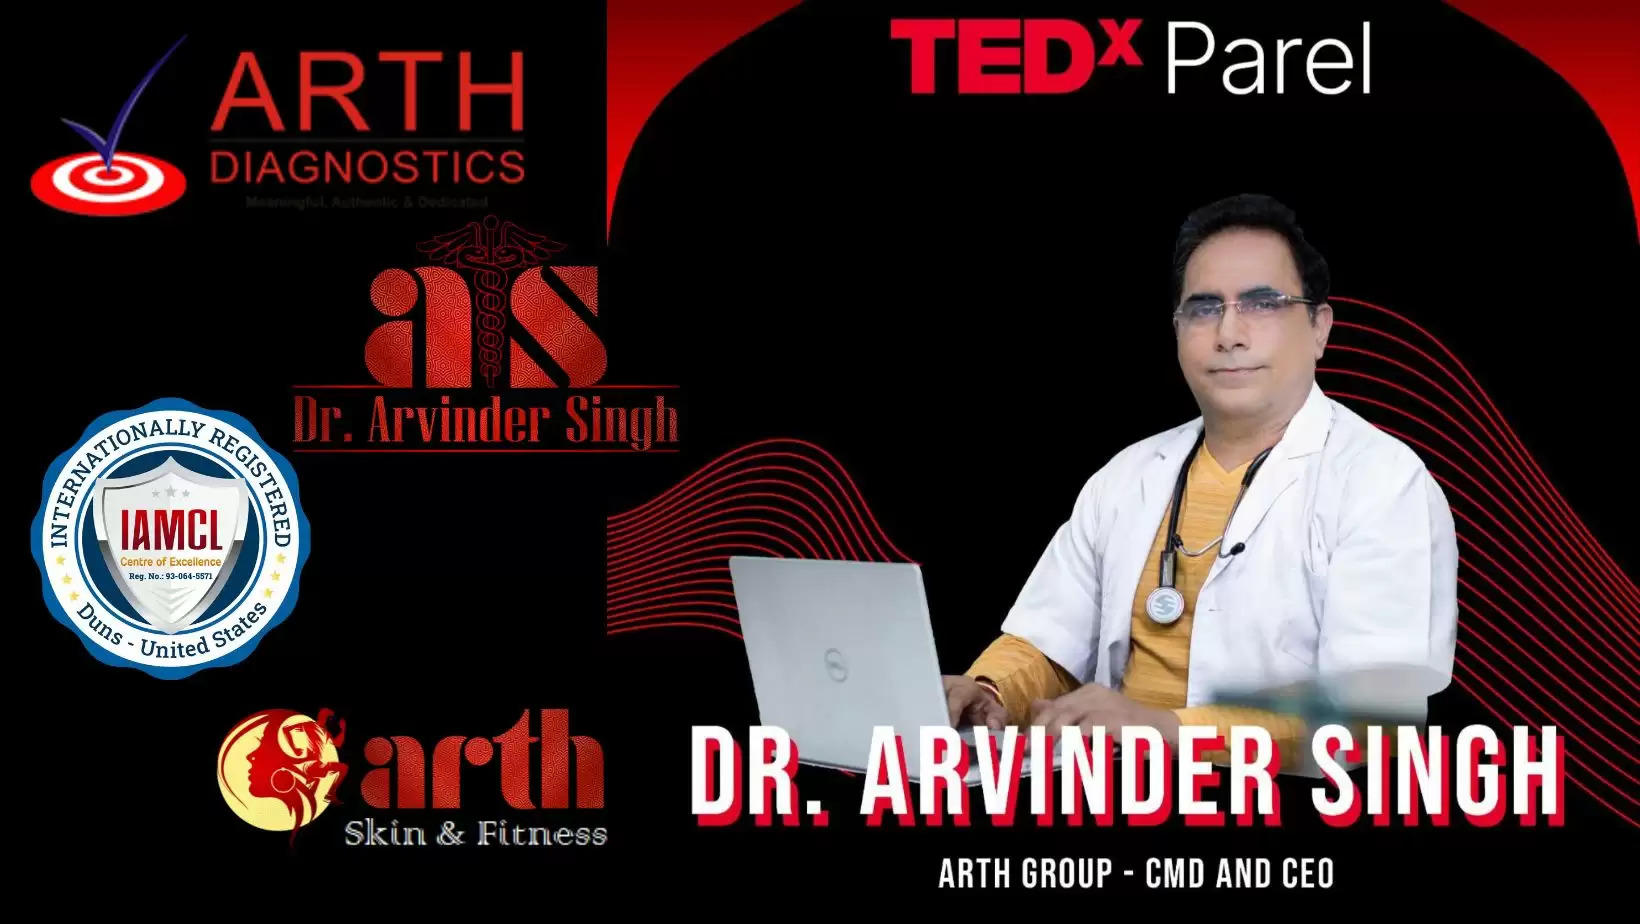 Udaipur Times, Top News from Udaipur, Achievements of people from Udaipur, Dr Arvinder Singh, Dr Arvinder Singh speaks at TEDx, TEDx and Udaipur, Speakers at TEDx from Udaipur